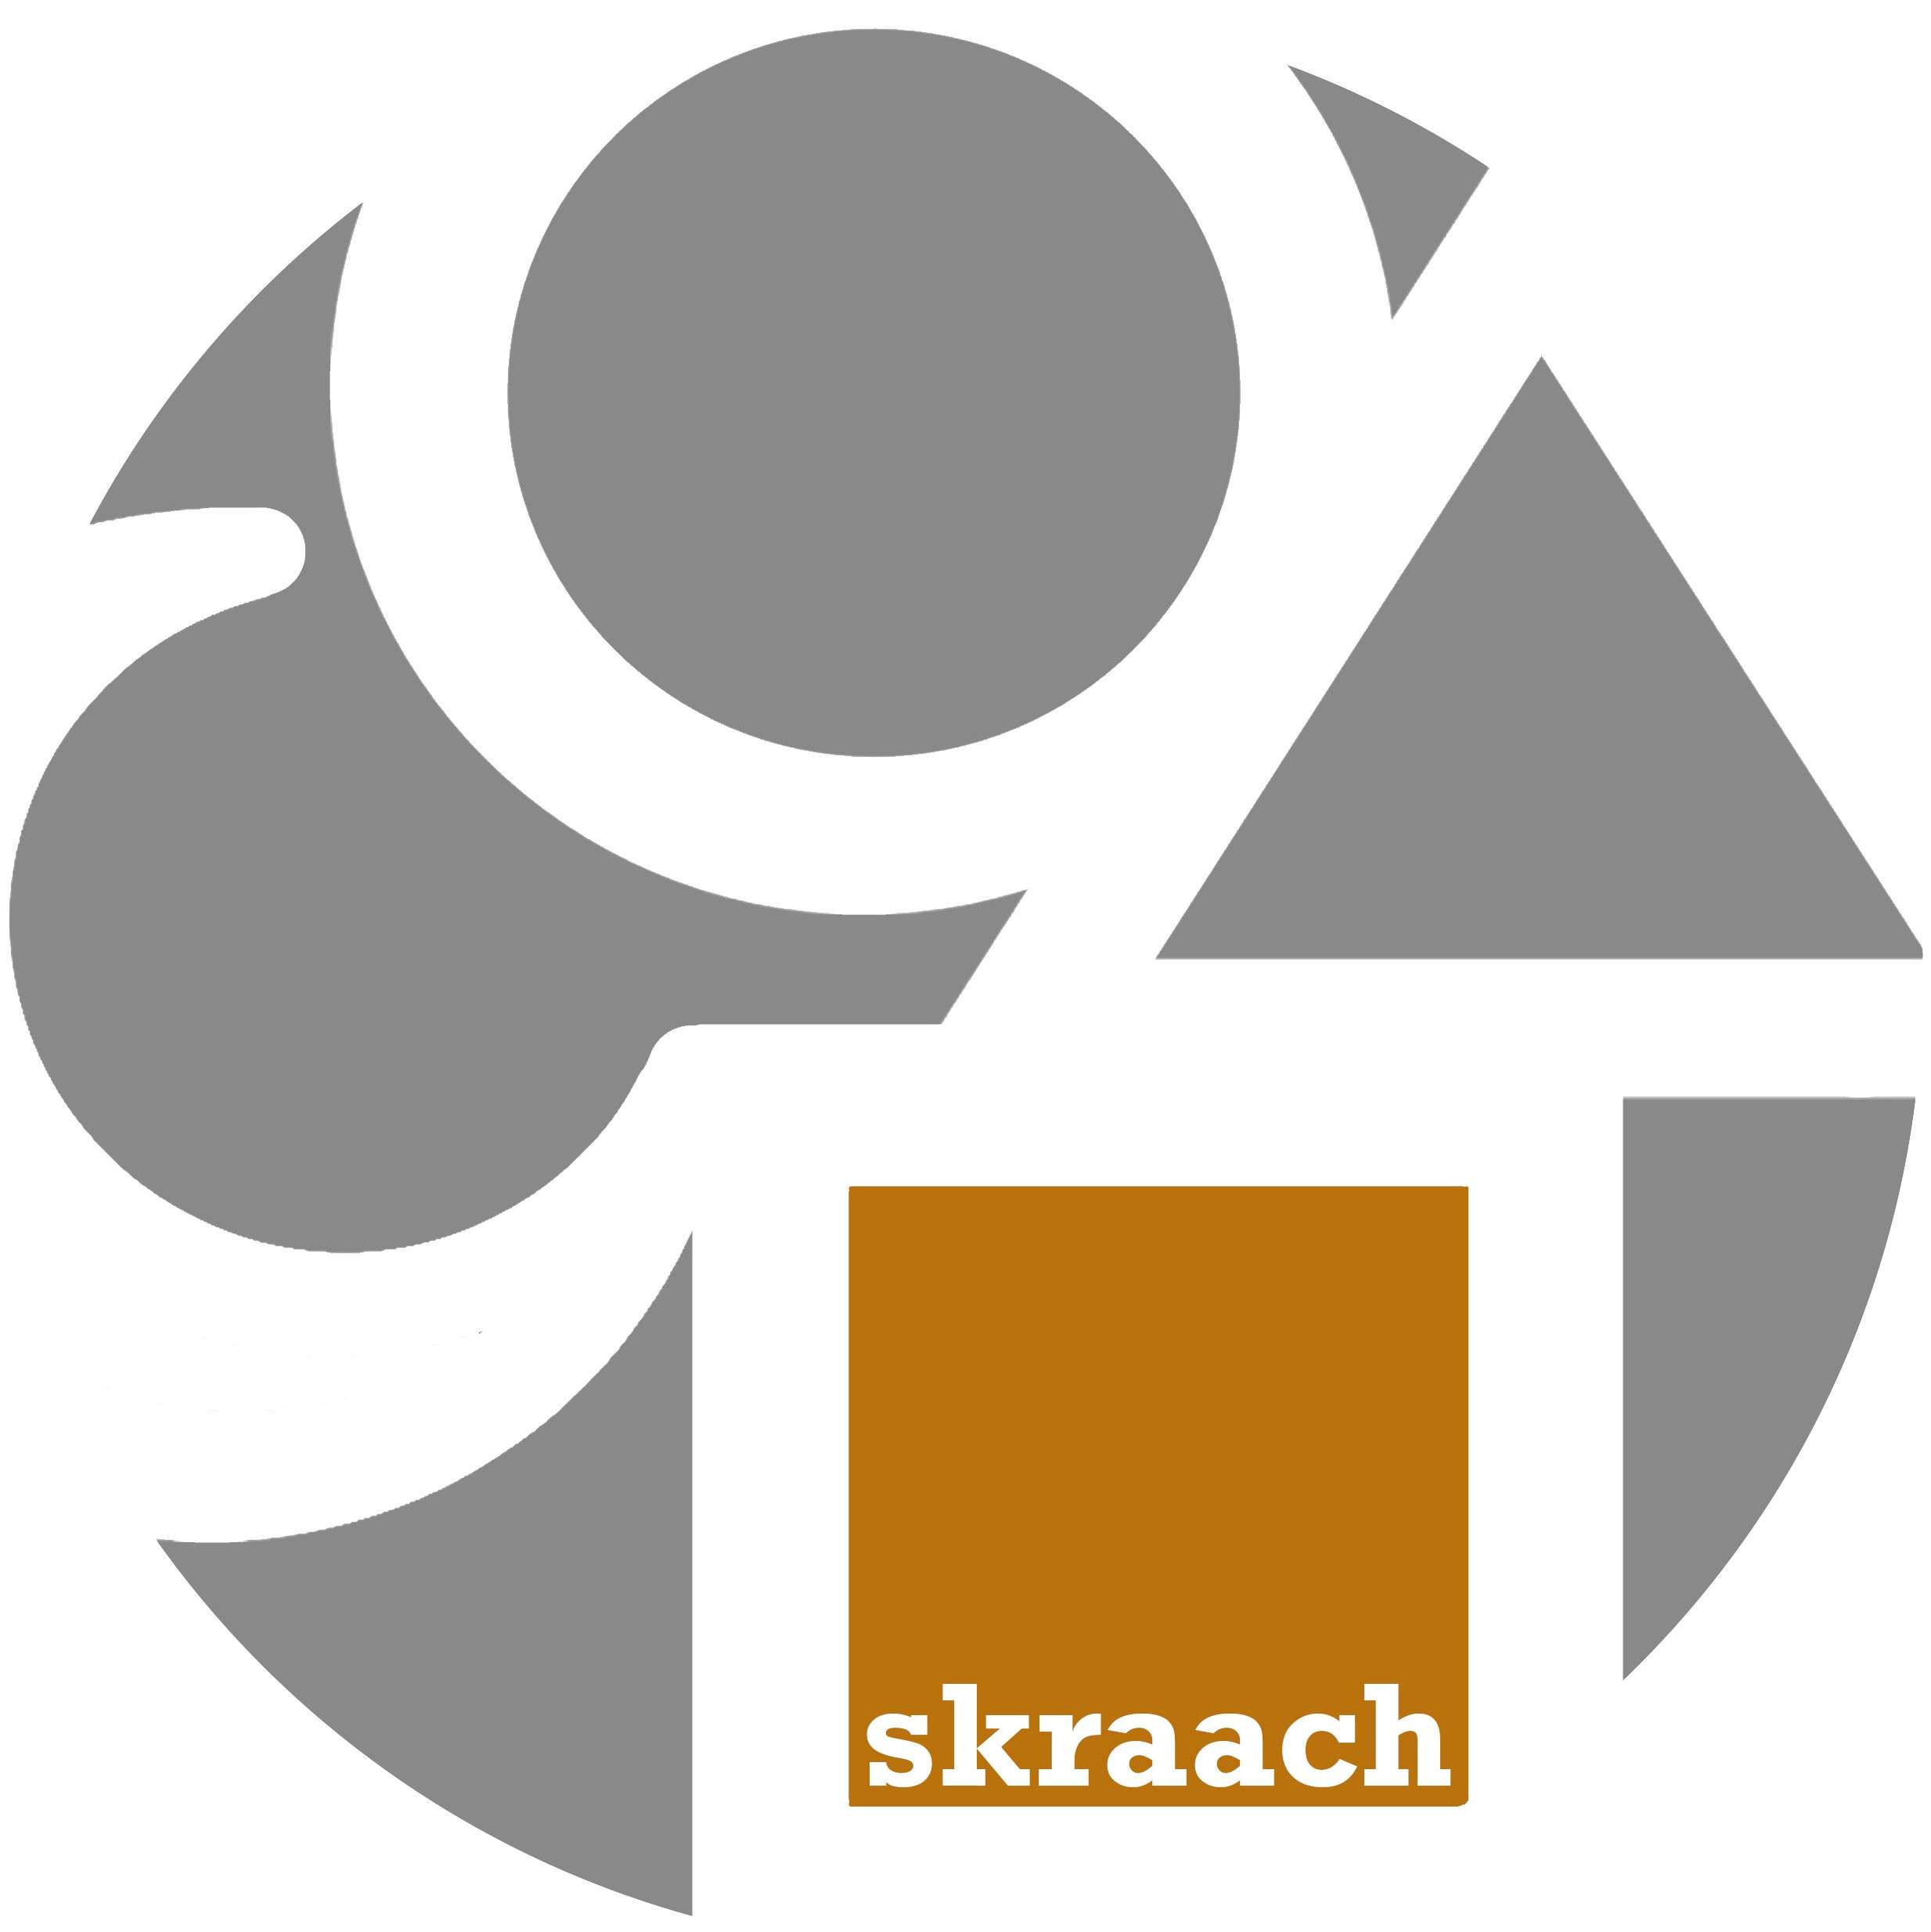 Skratch Labs Company Profile: Valuation, Funding & Investors